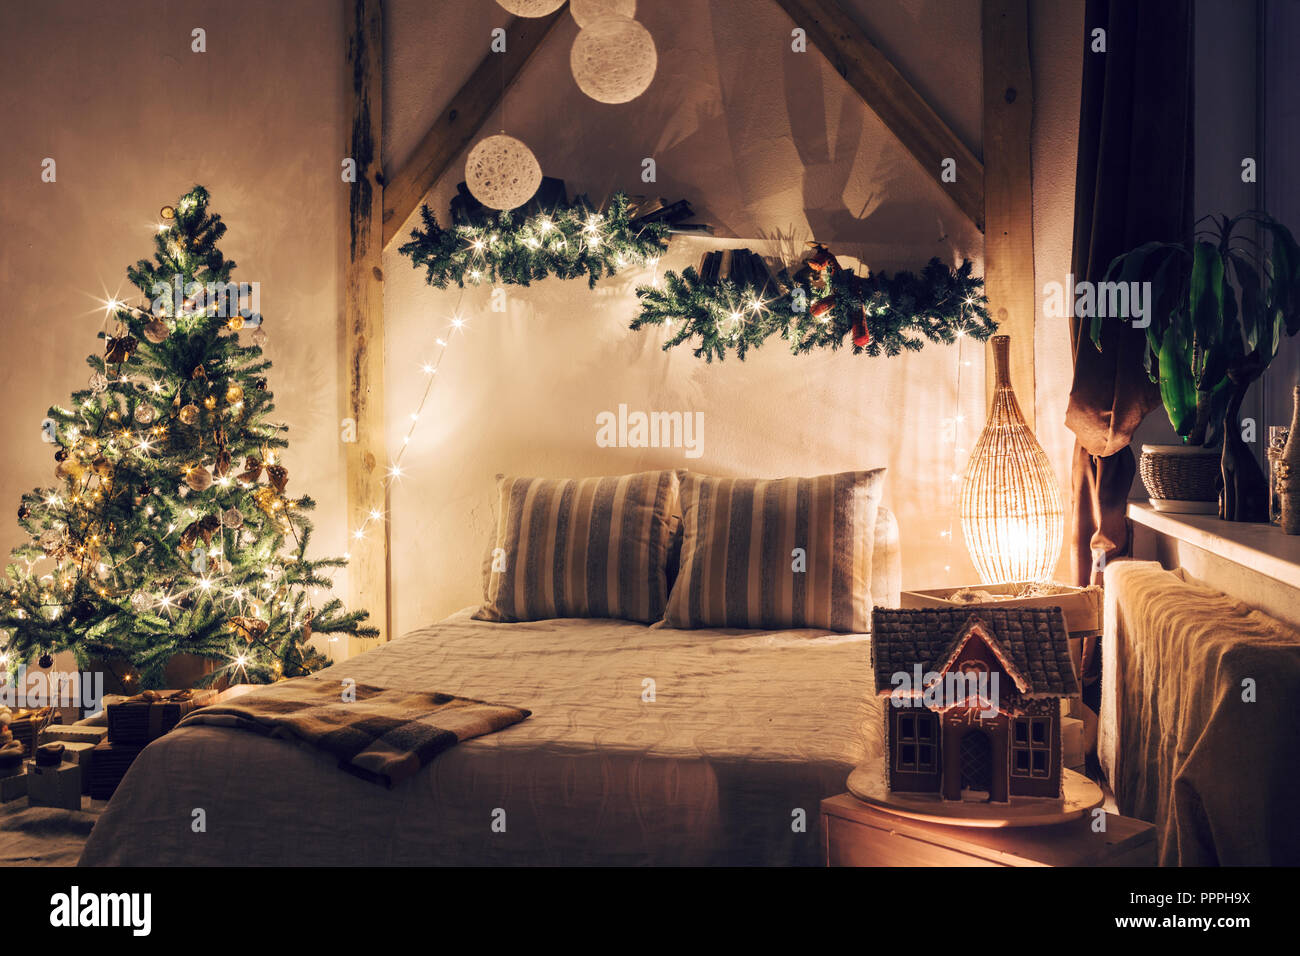 https://c8.alamy.com/comp/PPPH9X/warm-and-cozy-evening-in-living-room-sofa-bed-in-christmas-interior-concept-the-new-year-and-holidays-PPPH9X.jpg